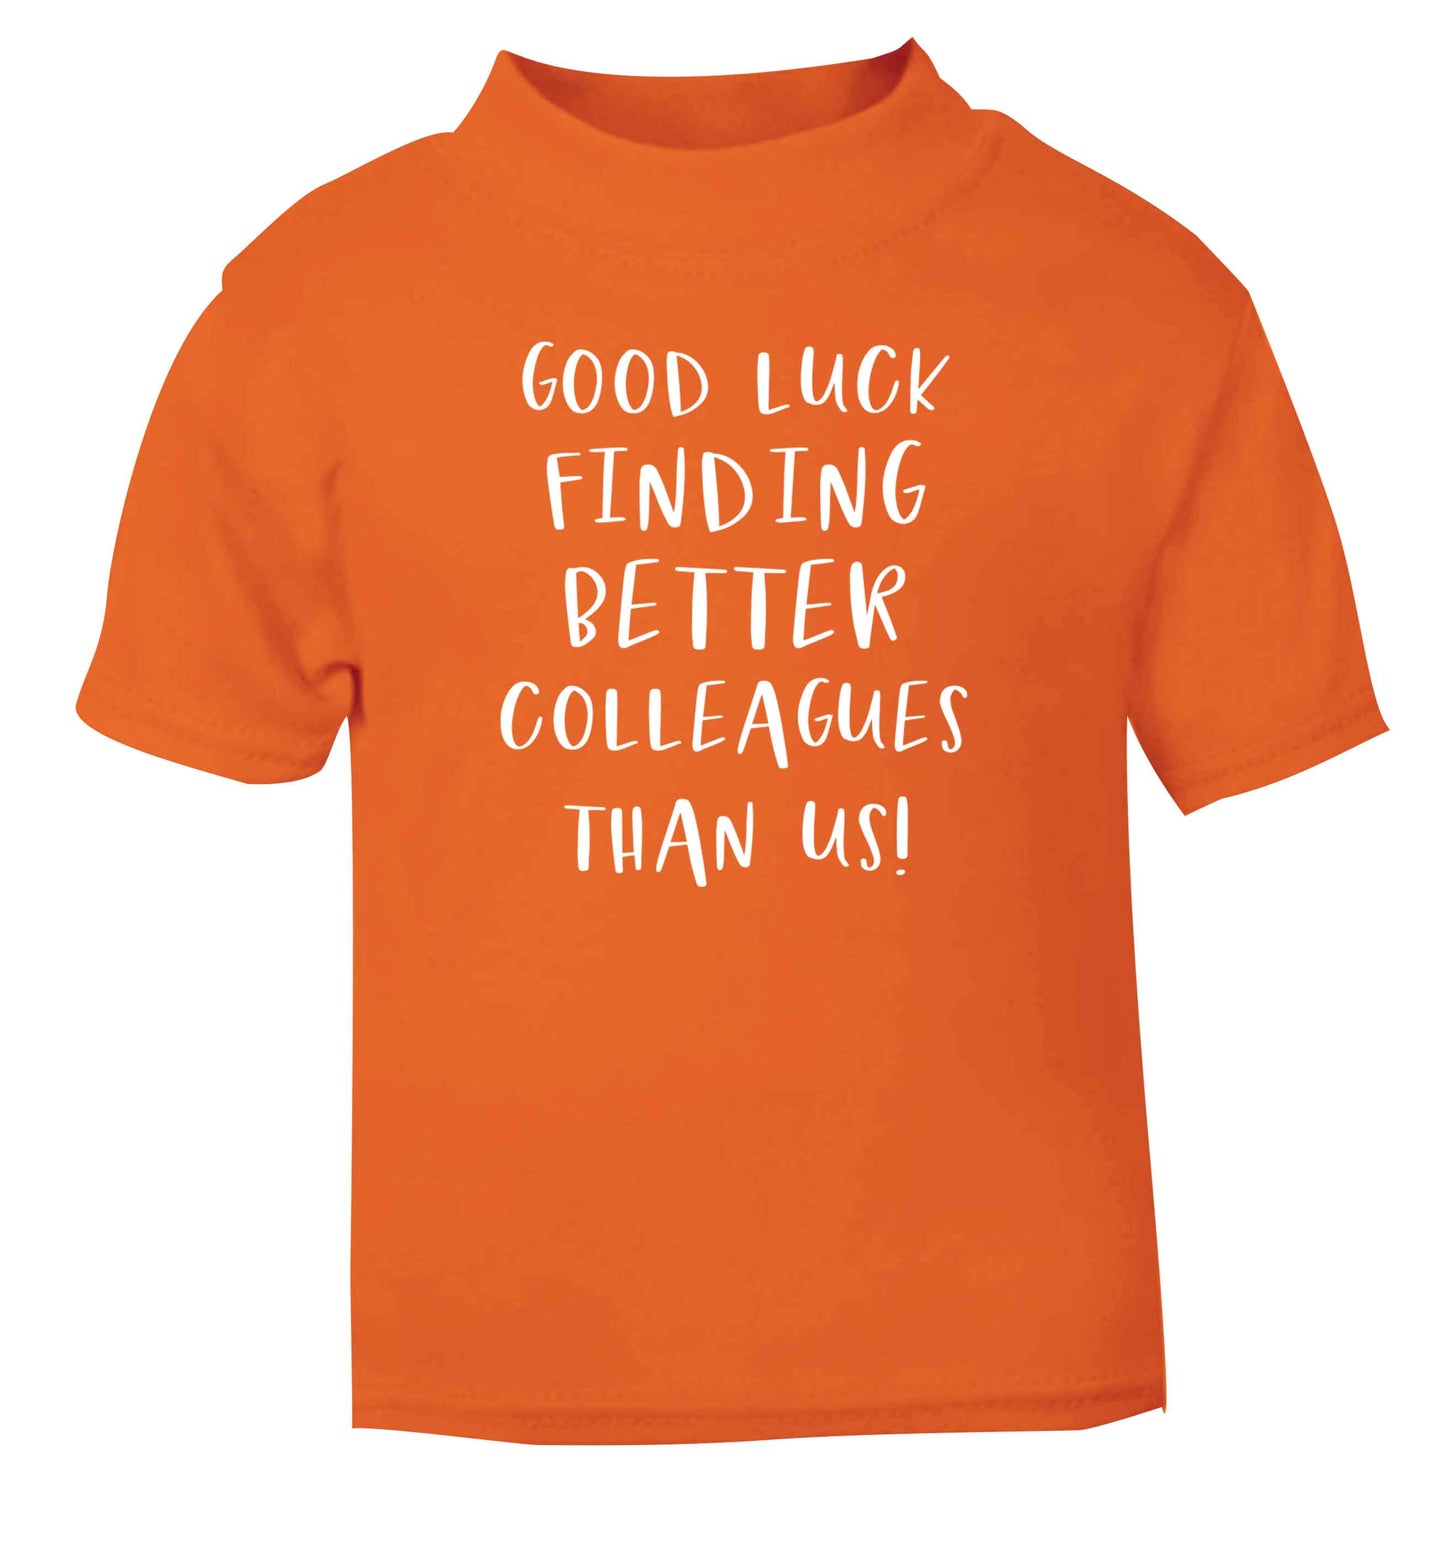 Good luck finding better colleagues than us! orange Baby Toddler Tshirt 2 Years